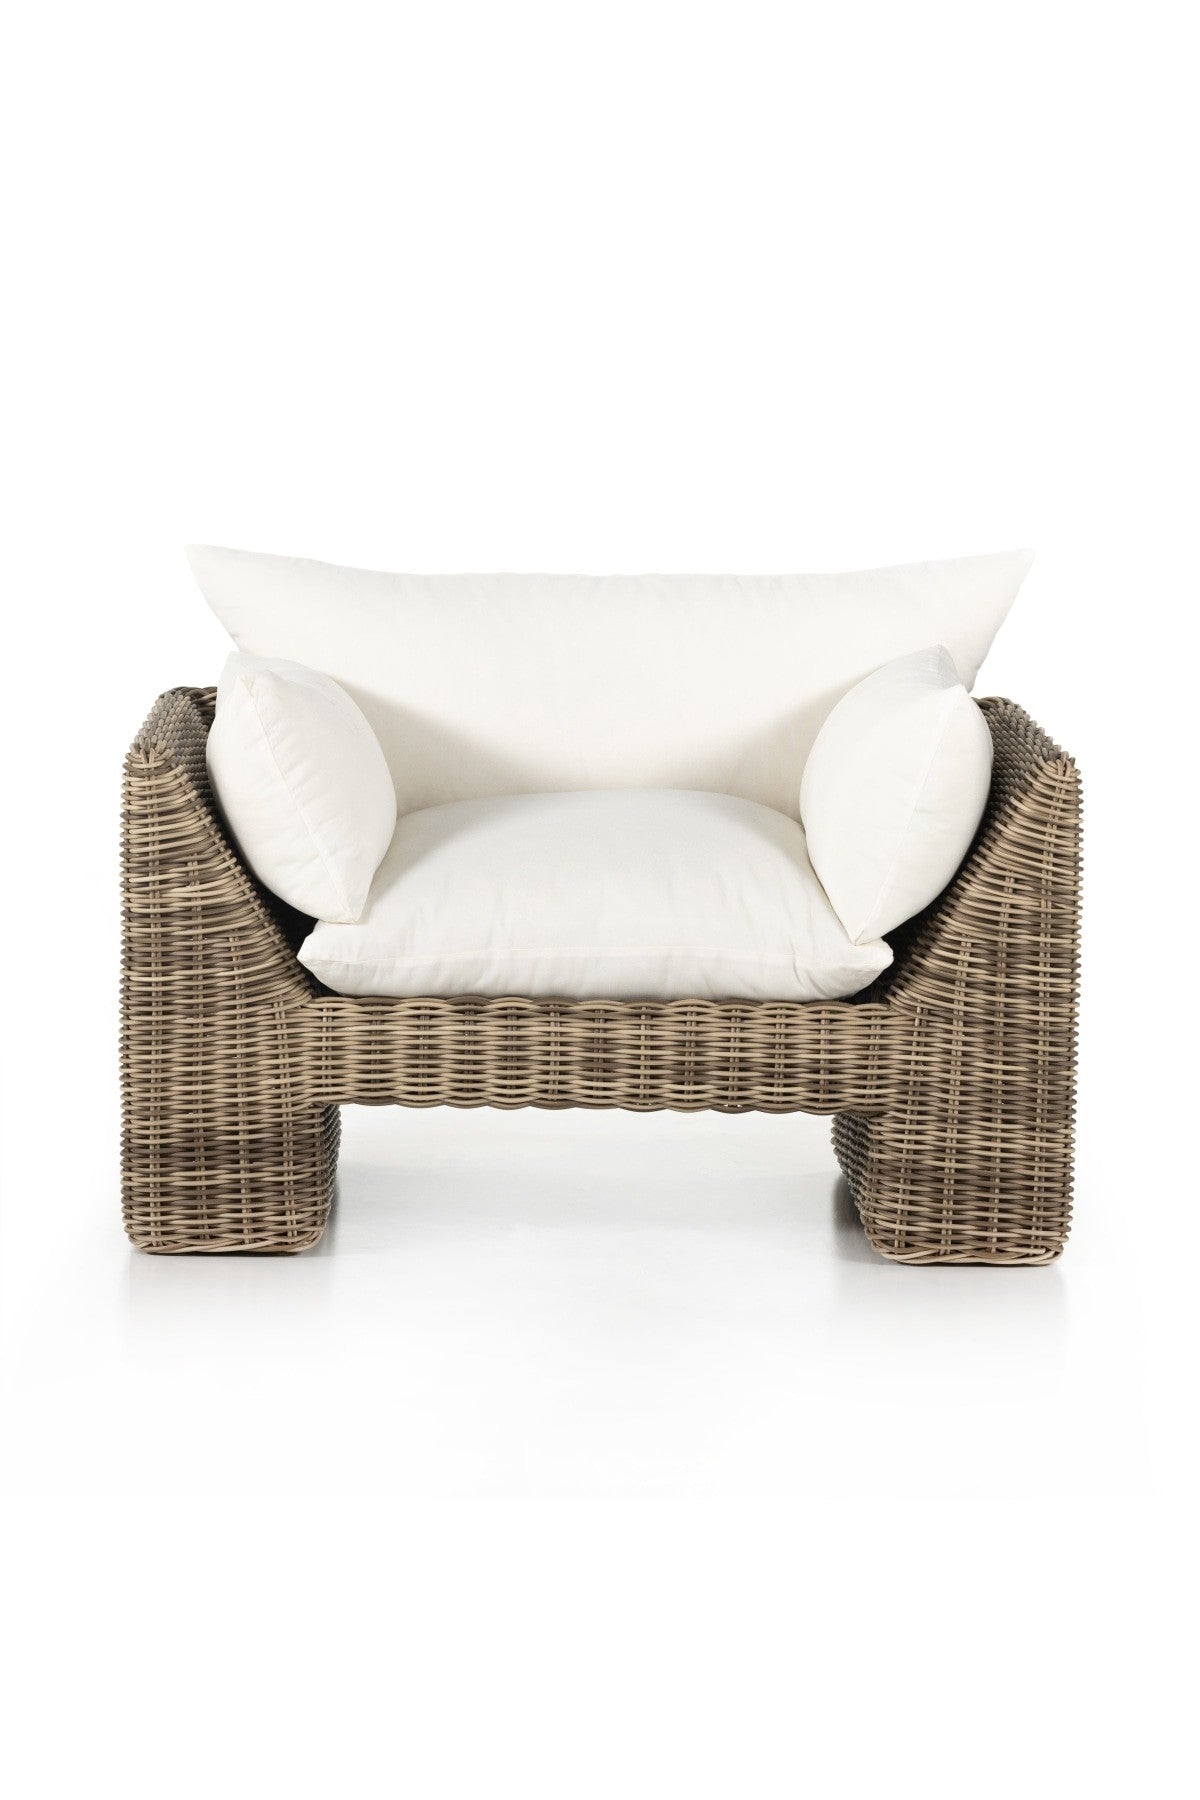 Holts Outdoor Chair